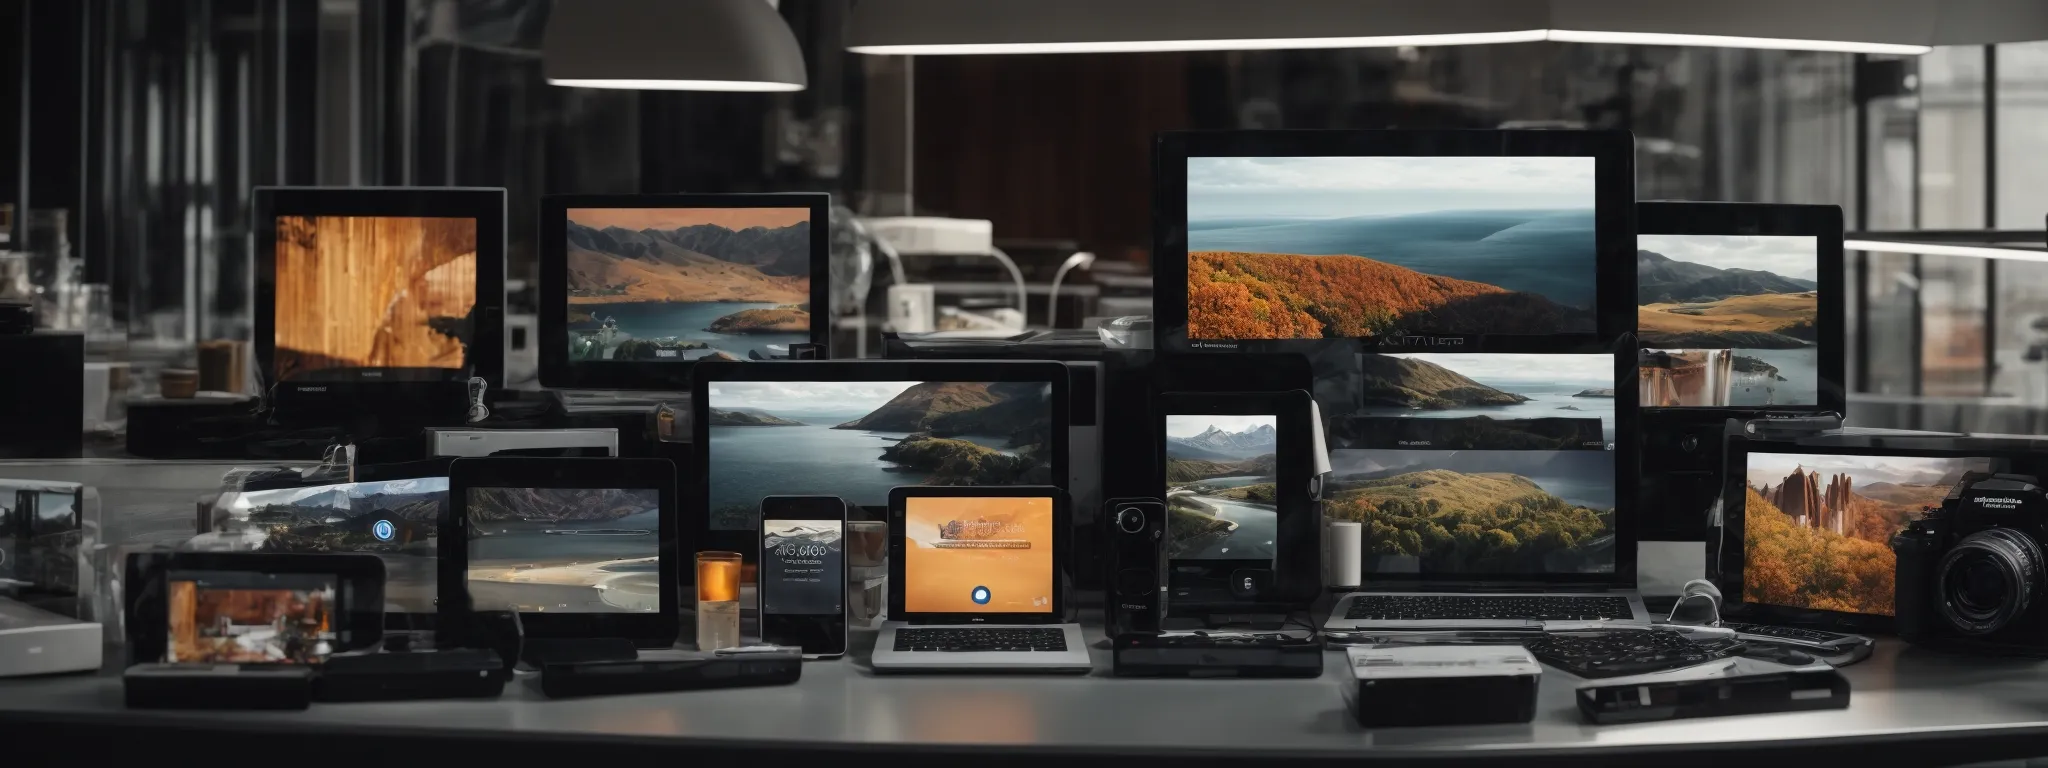 an array of digital devices displaying a unified marketing message across their screens.